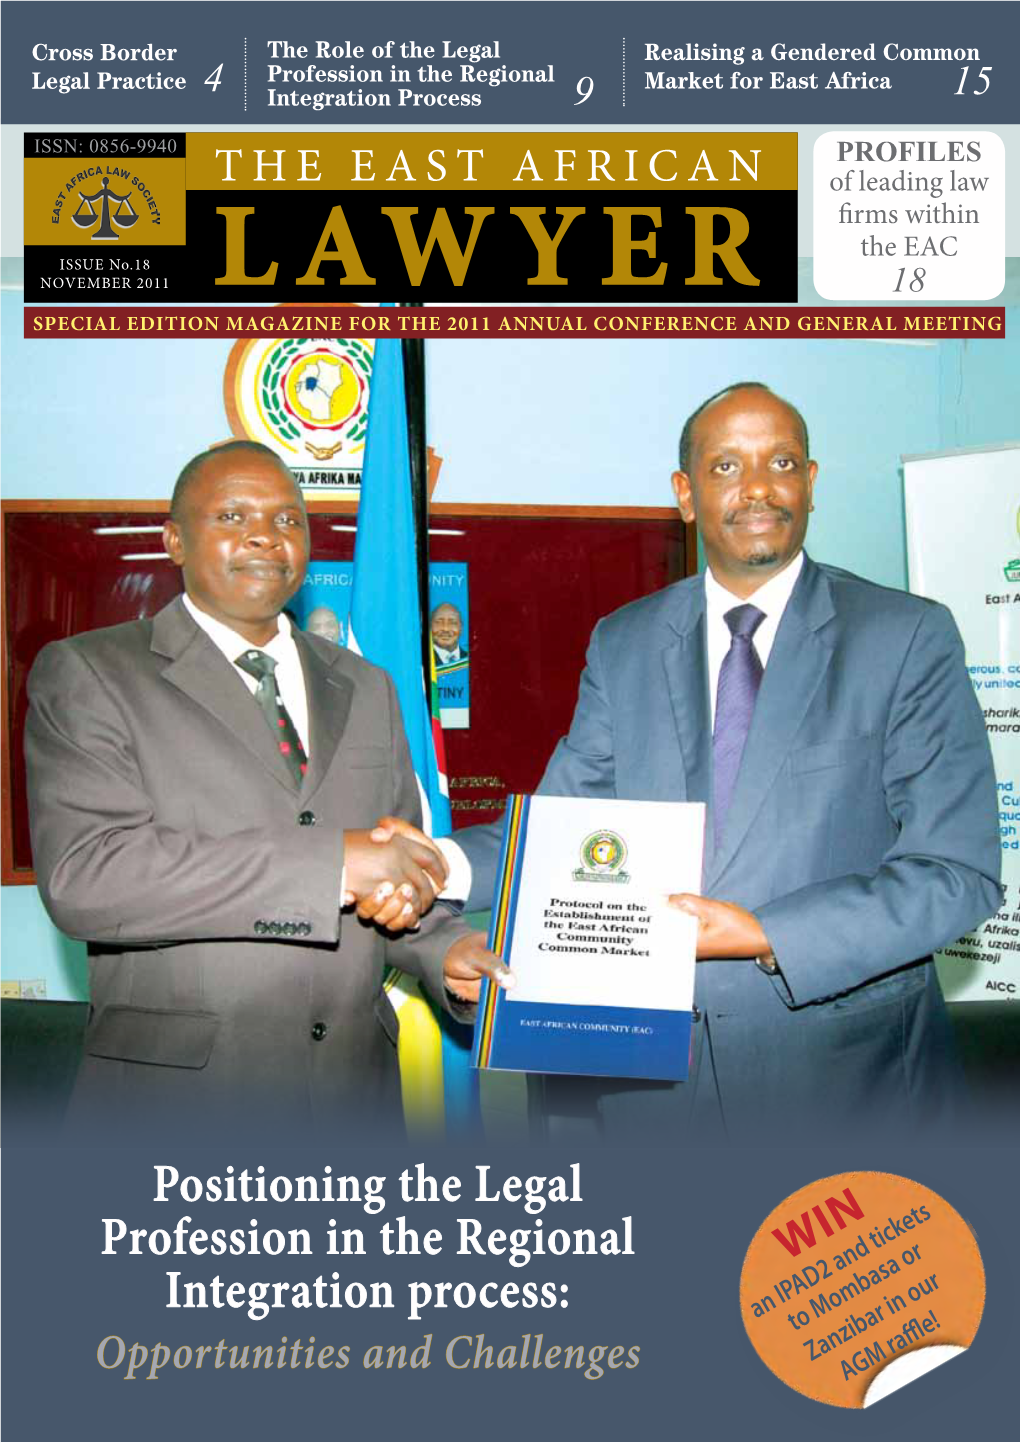 THE East African LAWYER Contents Chief Executive Officer Tito Byenkya